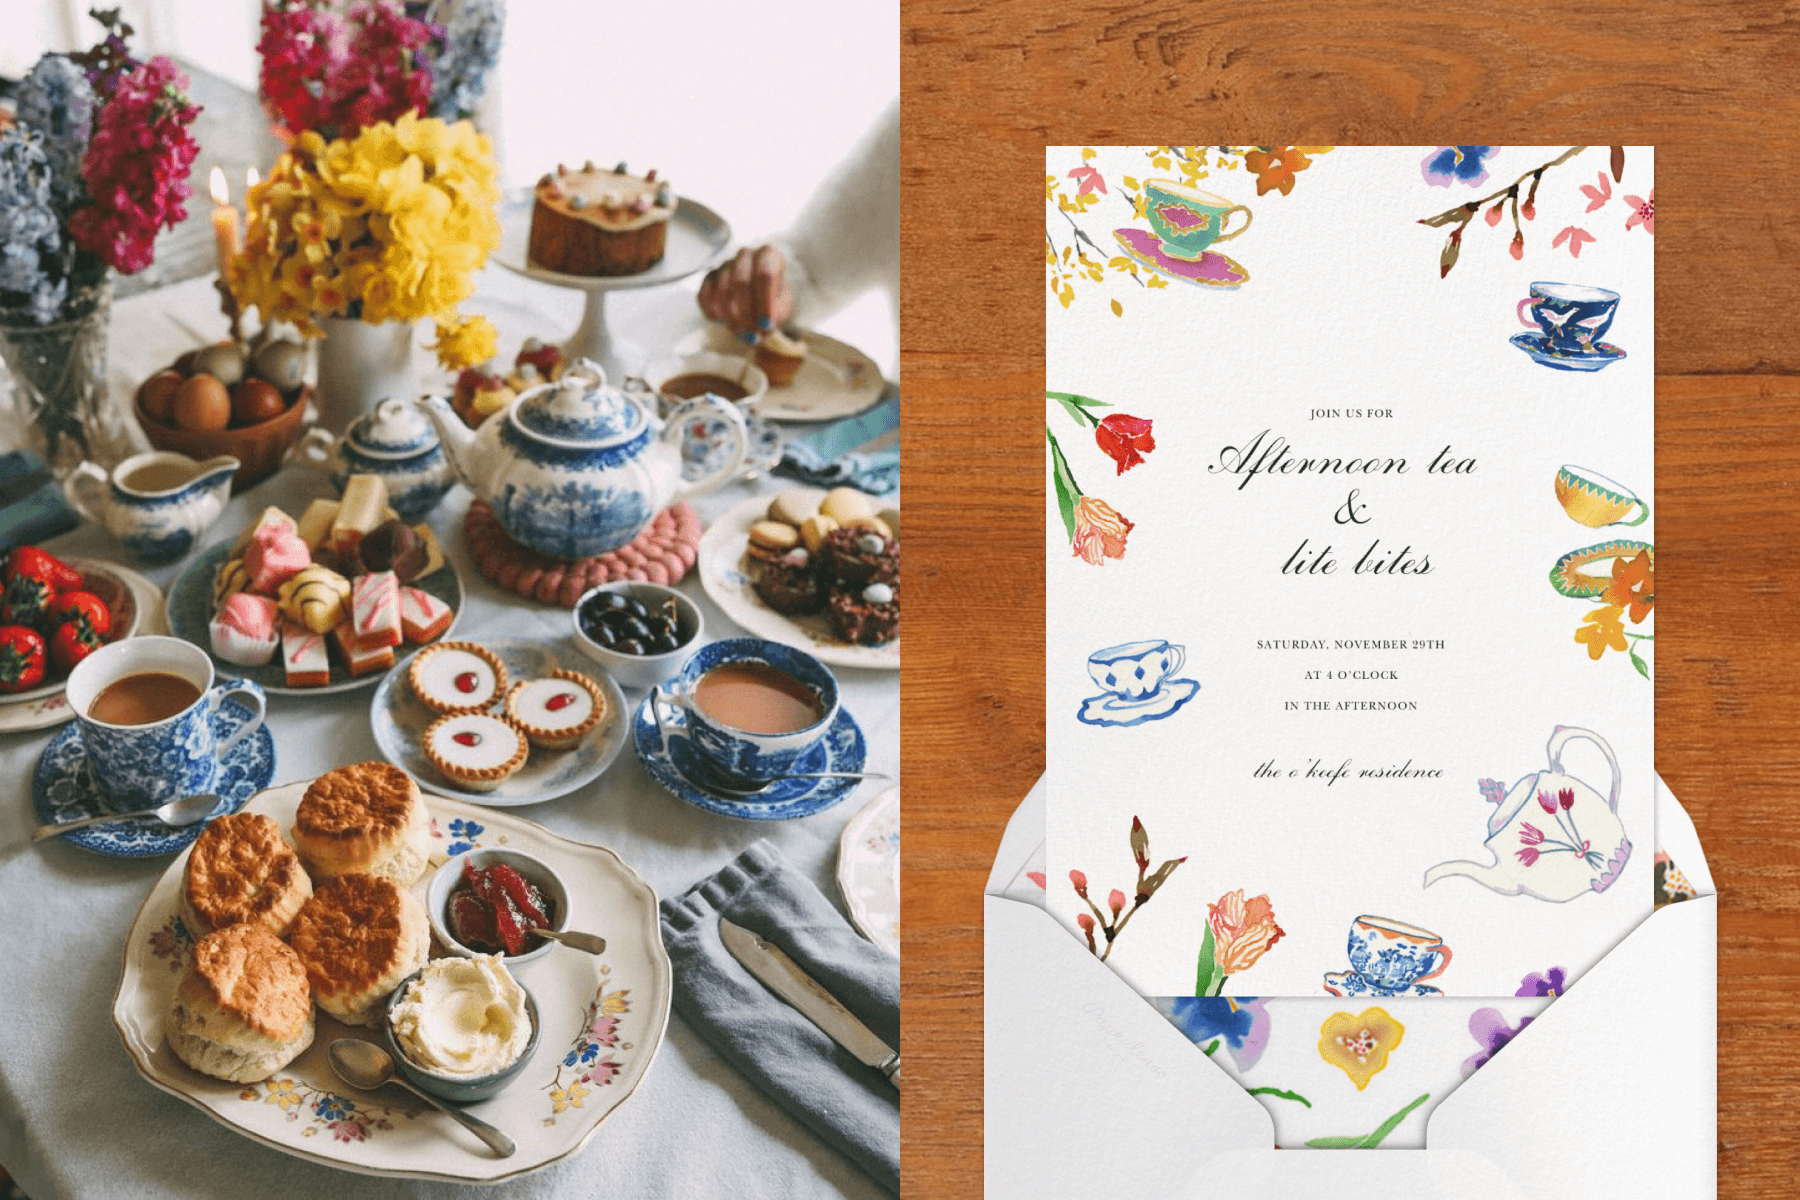 Blue teacups and pots an an assortment of flowers and tea time snacks; an invitation with teacups and flowers around the border